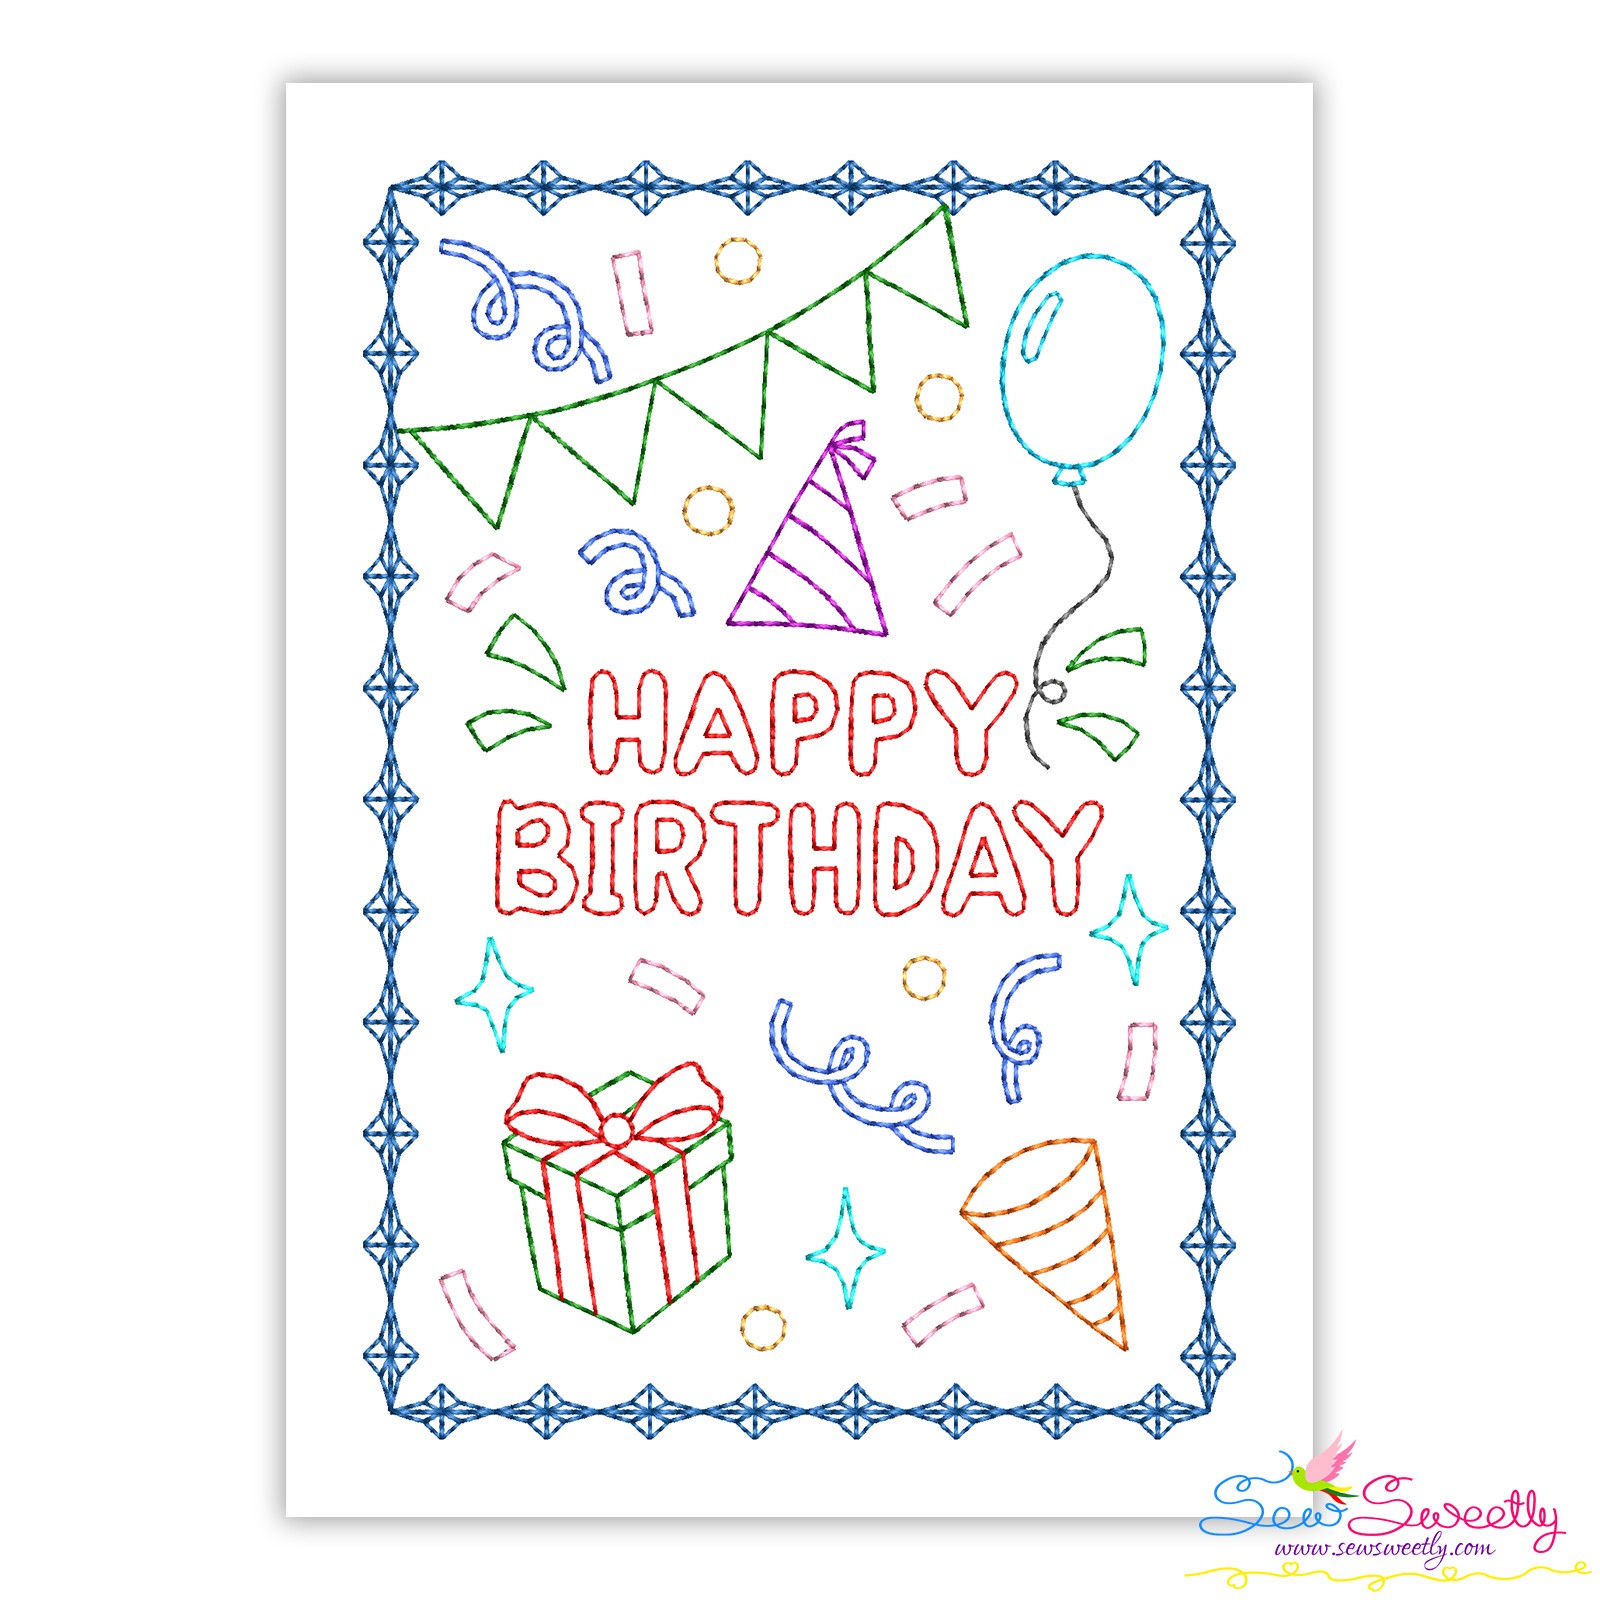 Happy Birthday To You' printed embroidery design greetings card